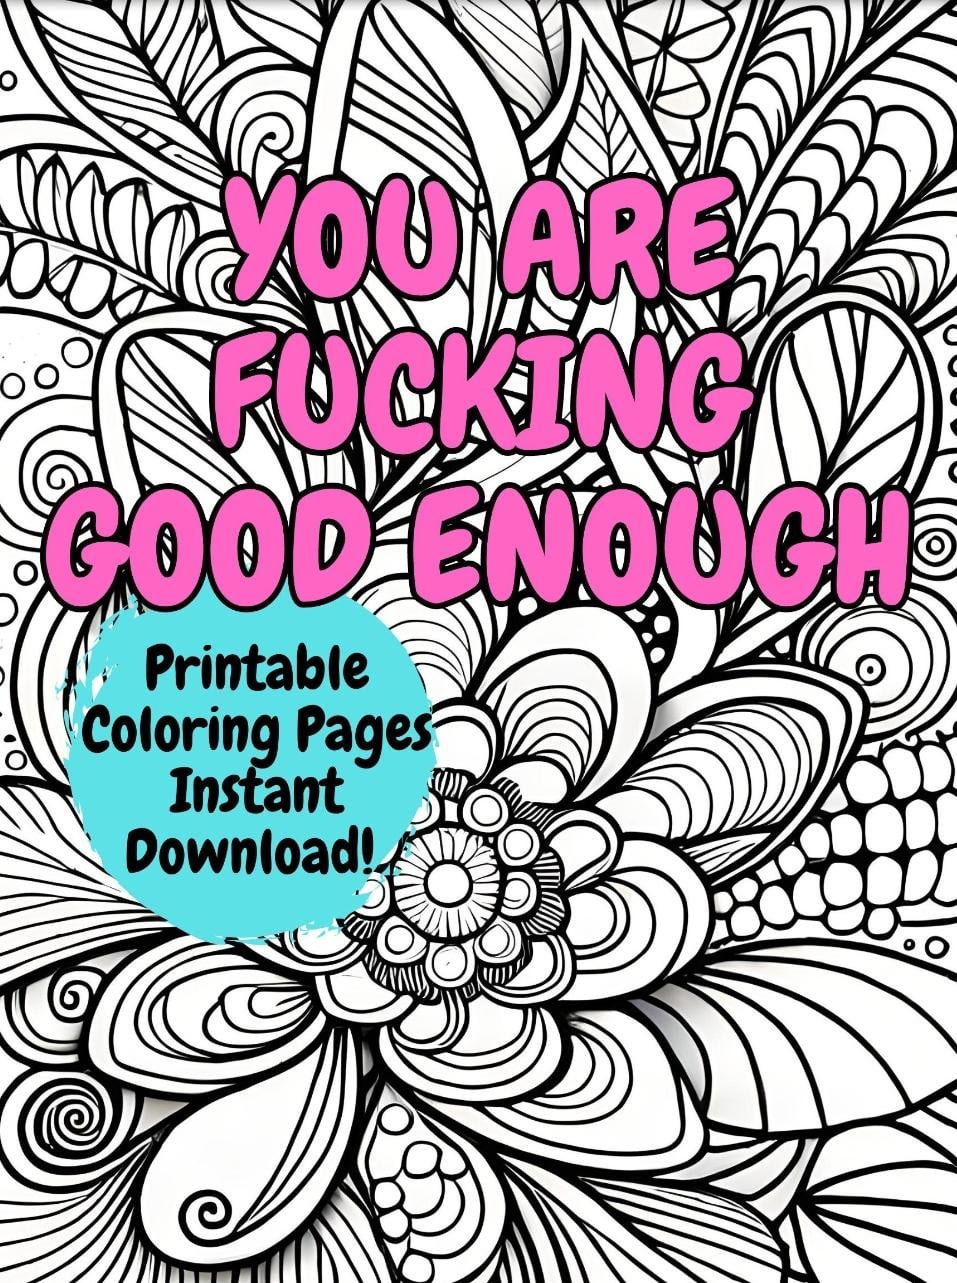 Printable swear word coloring pages available for instant download ð retsypromos